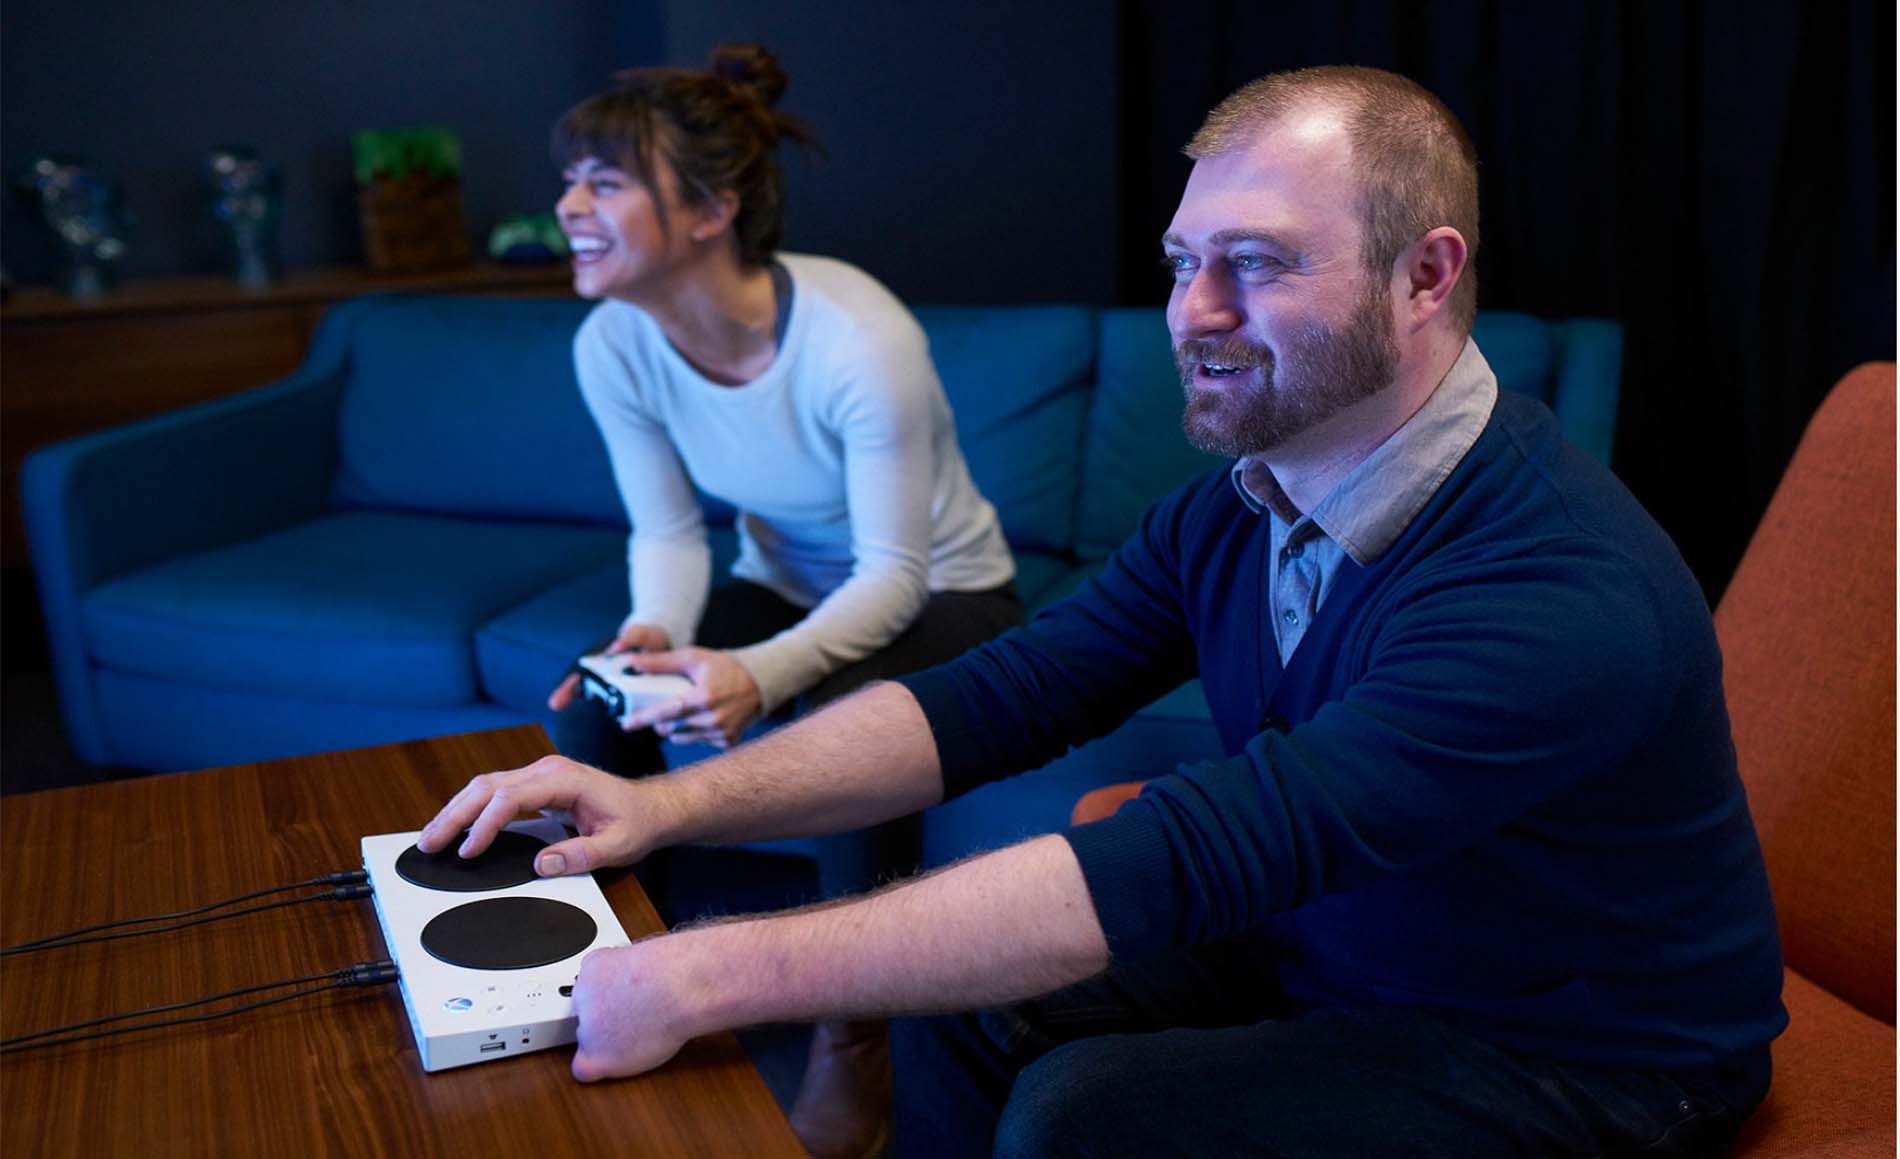 Solomon Romney, right, was one of the gamers who tested the packaging for the Xbox Adaptive Controller.